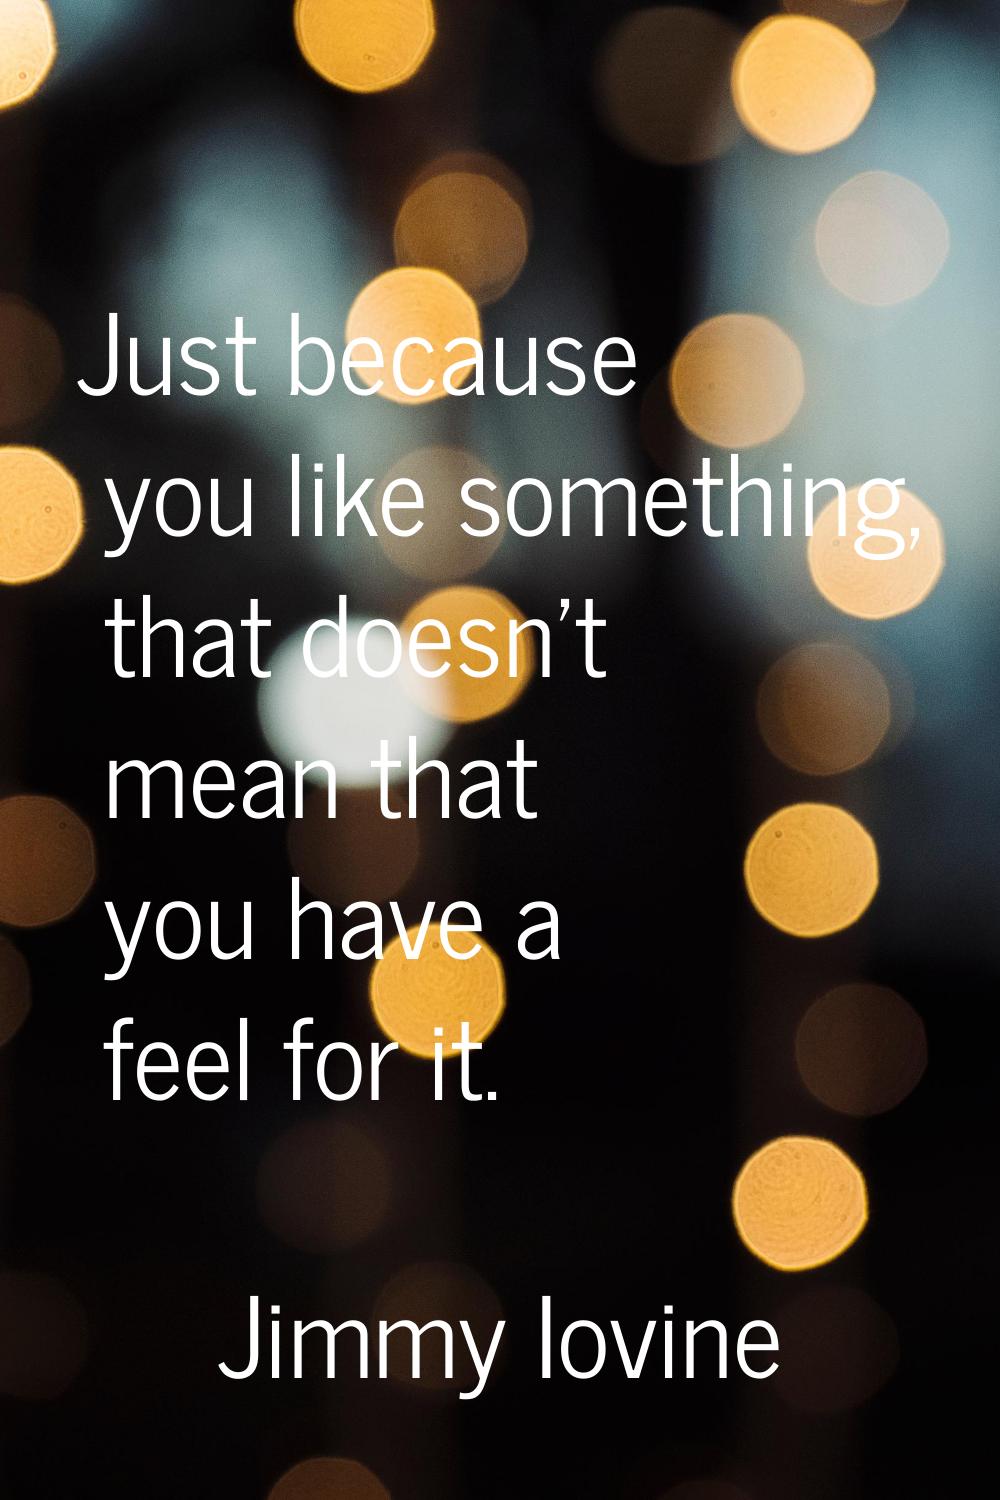 Just because you like something, that doesn't mean that you have a feel for it.